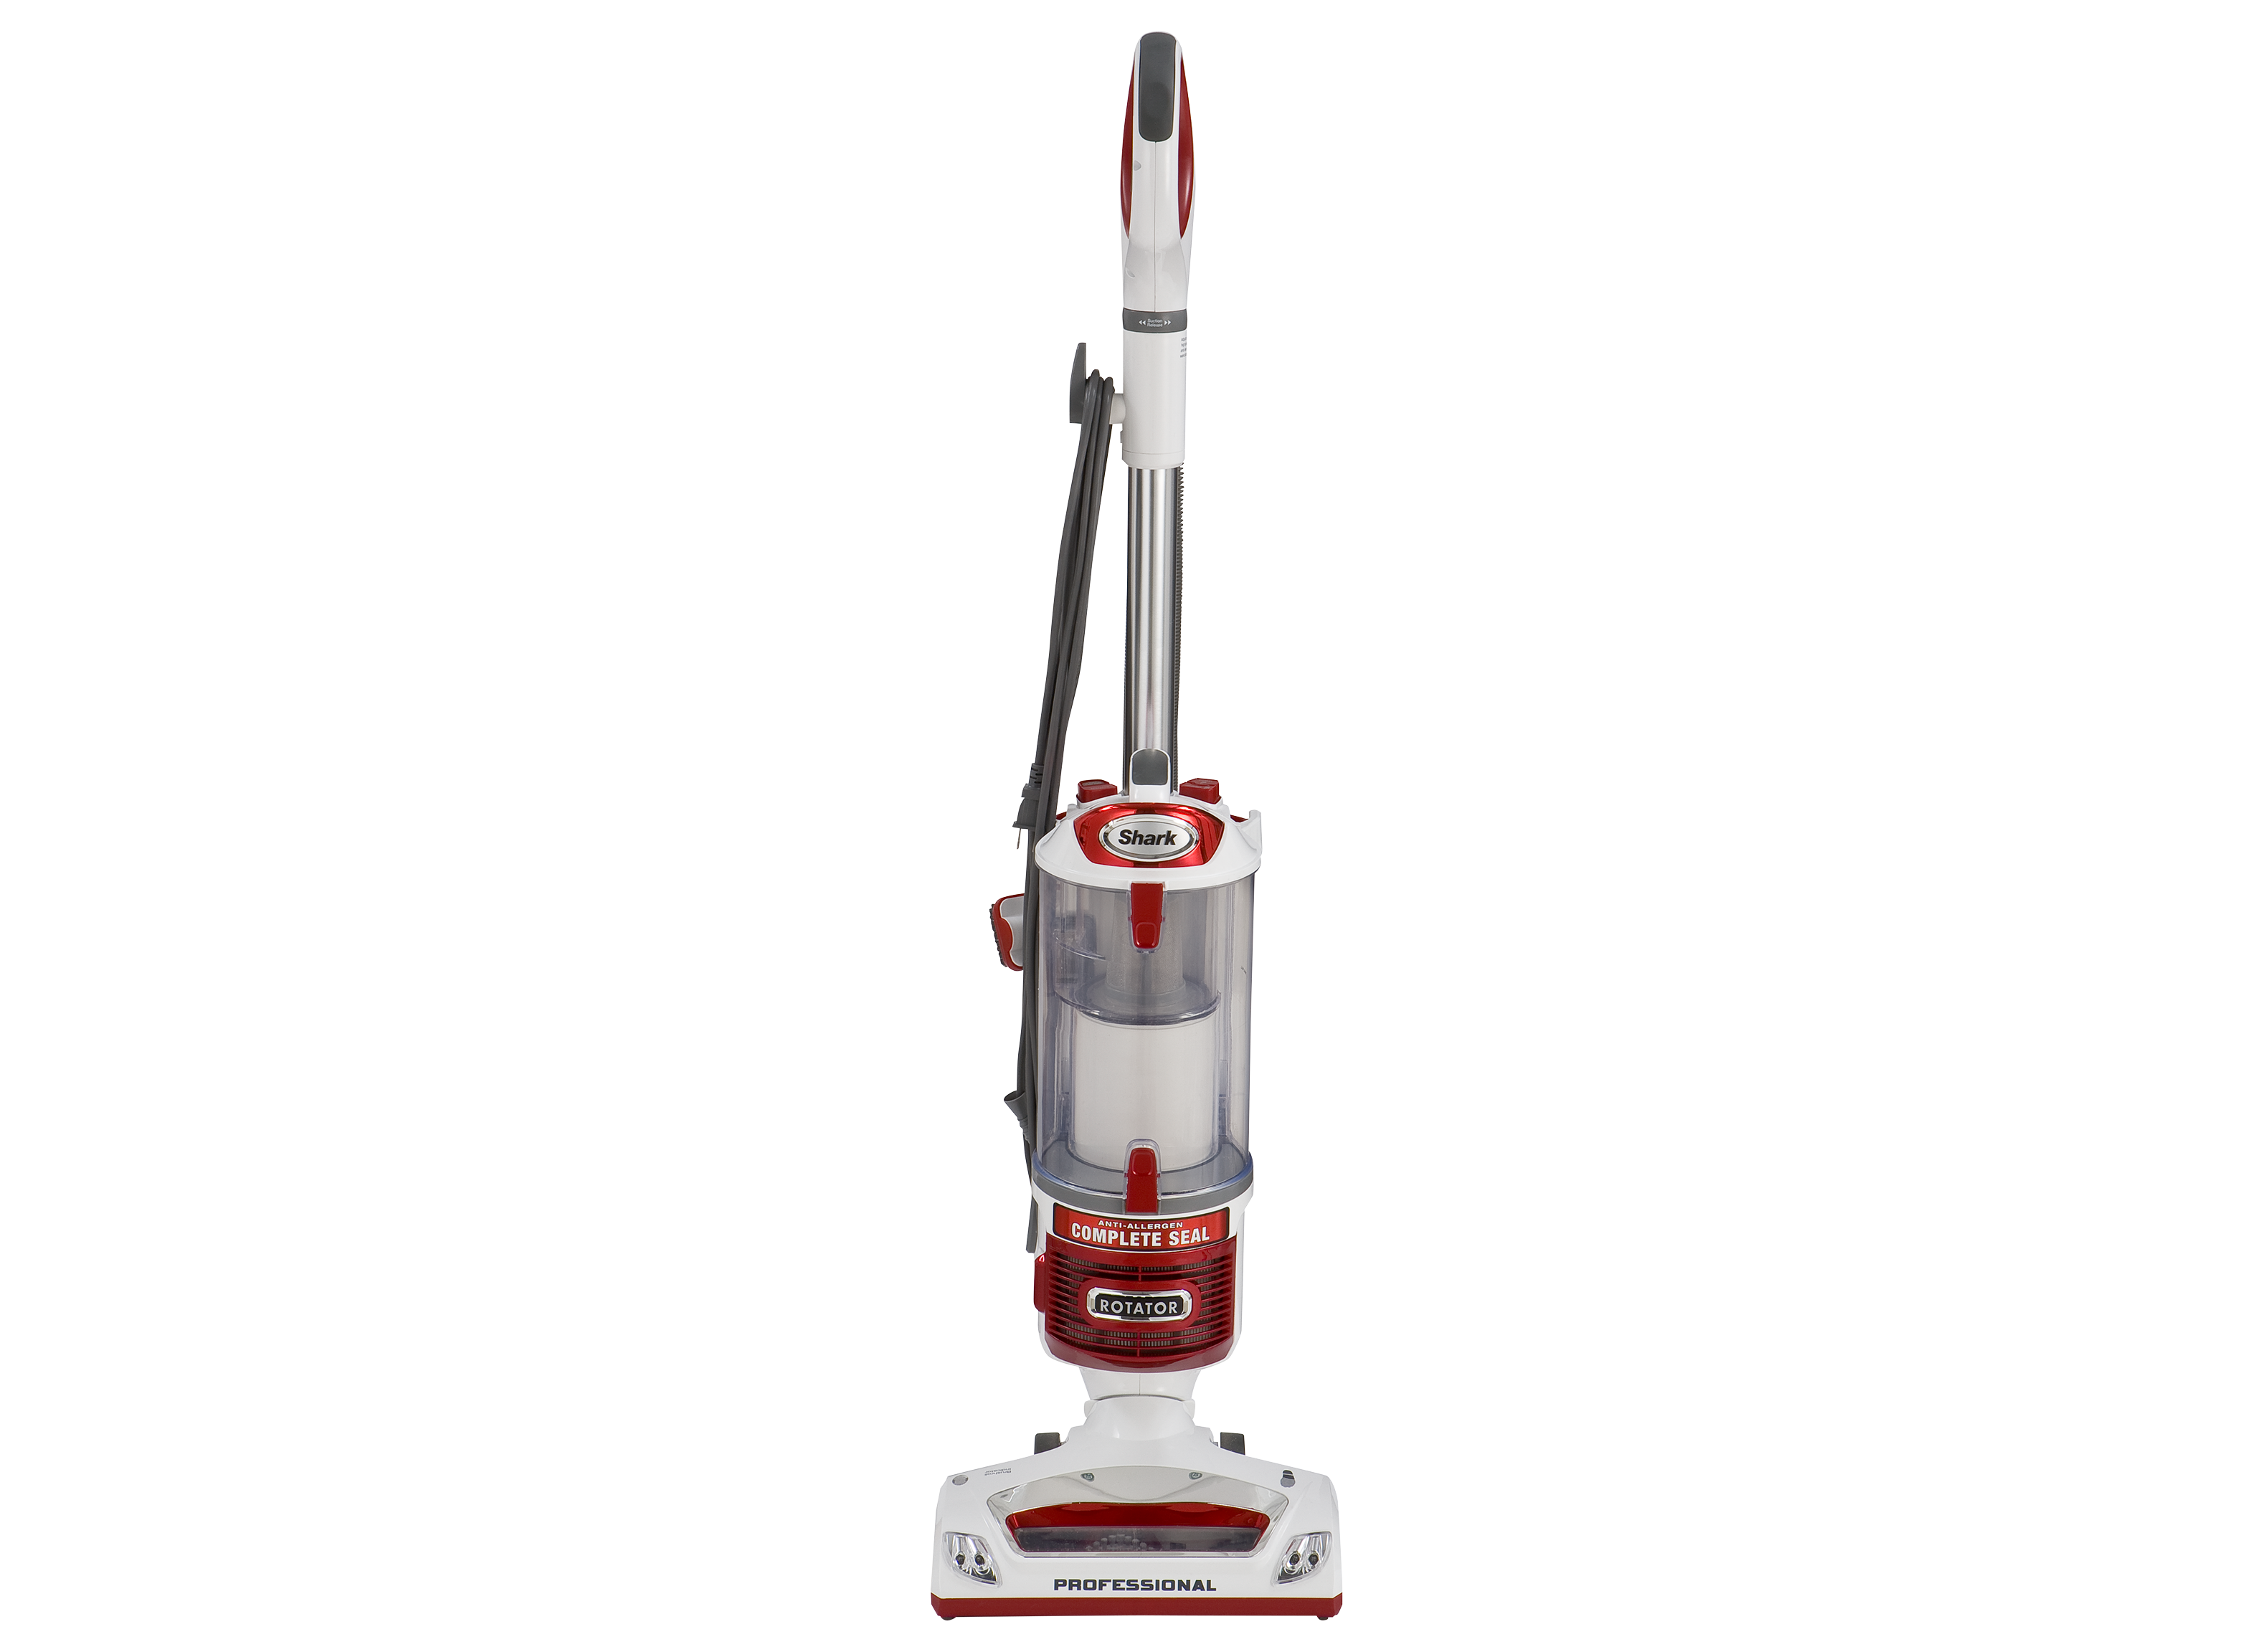 https://crdms.images.consumerreports.org/prod/products/cr/models/220854-bagless-upright-vacuums-shark-rotator-professional-lift-away-nv501-10018865.png